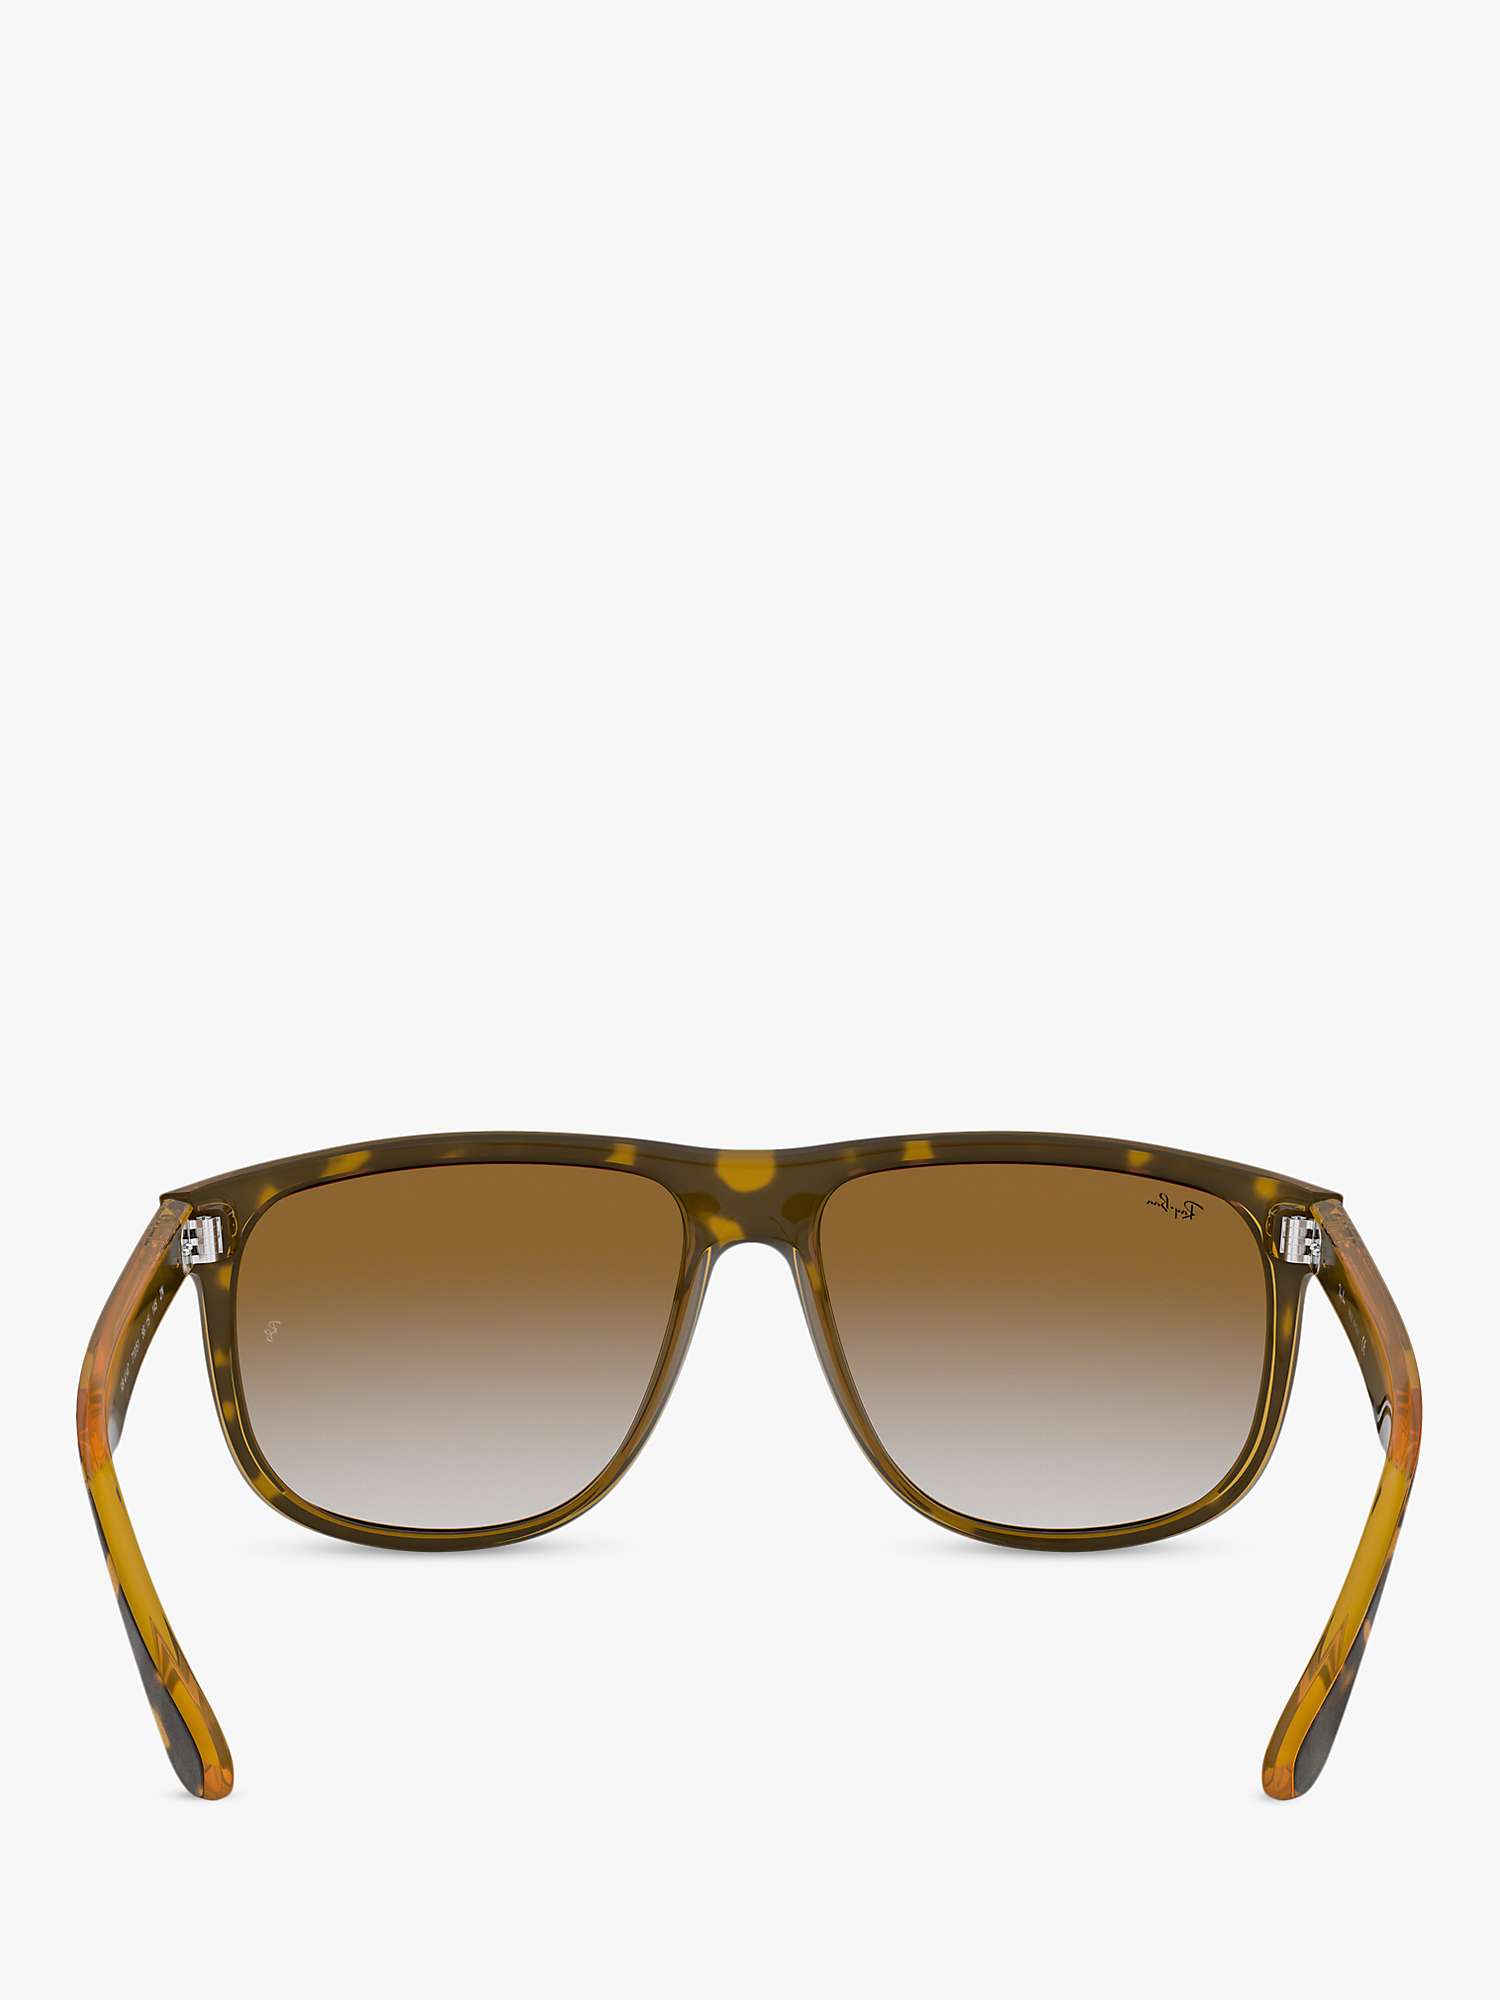 Buy Ray-Ban RB4147 Square Sunglasses Online at johnlewis.com